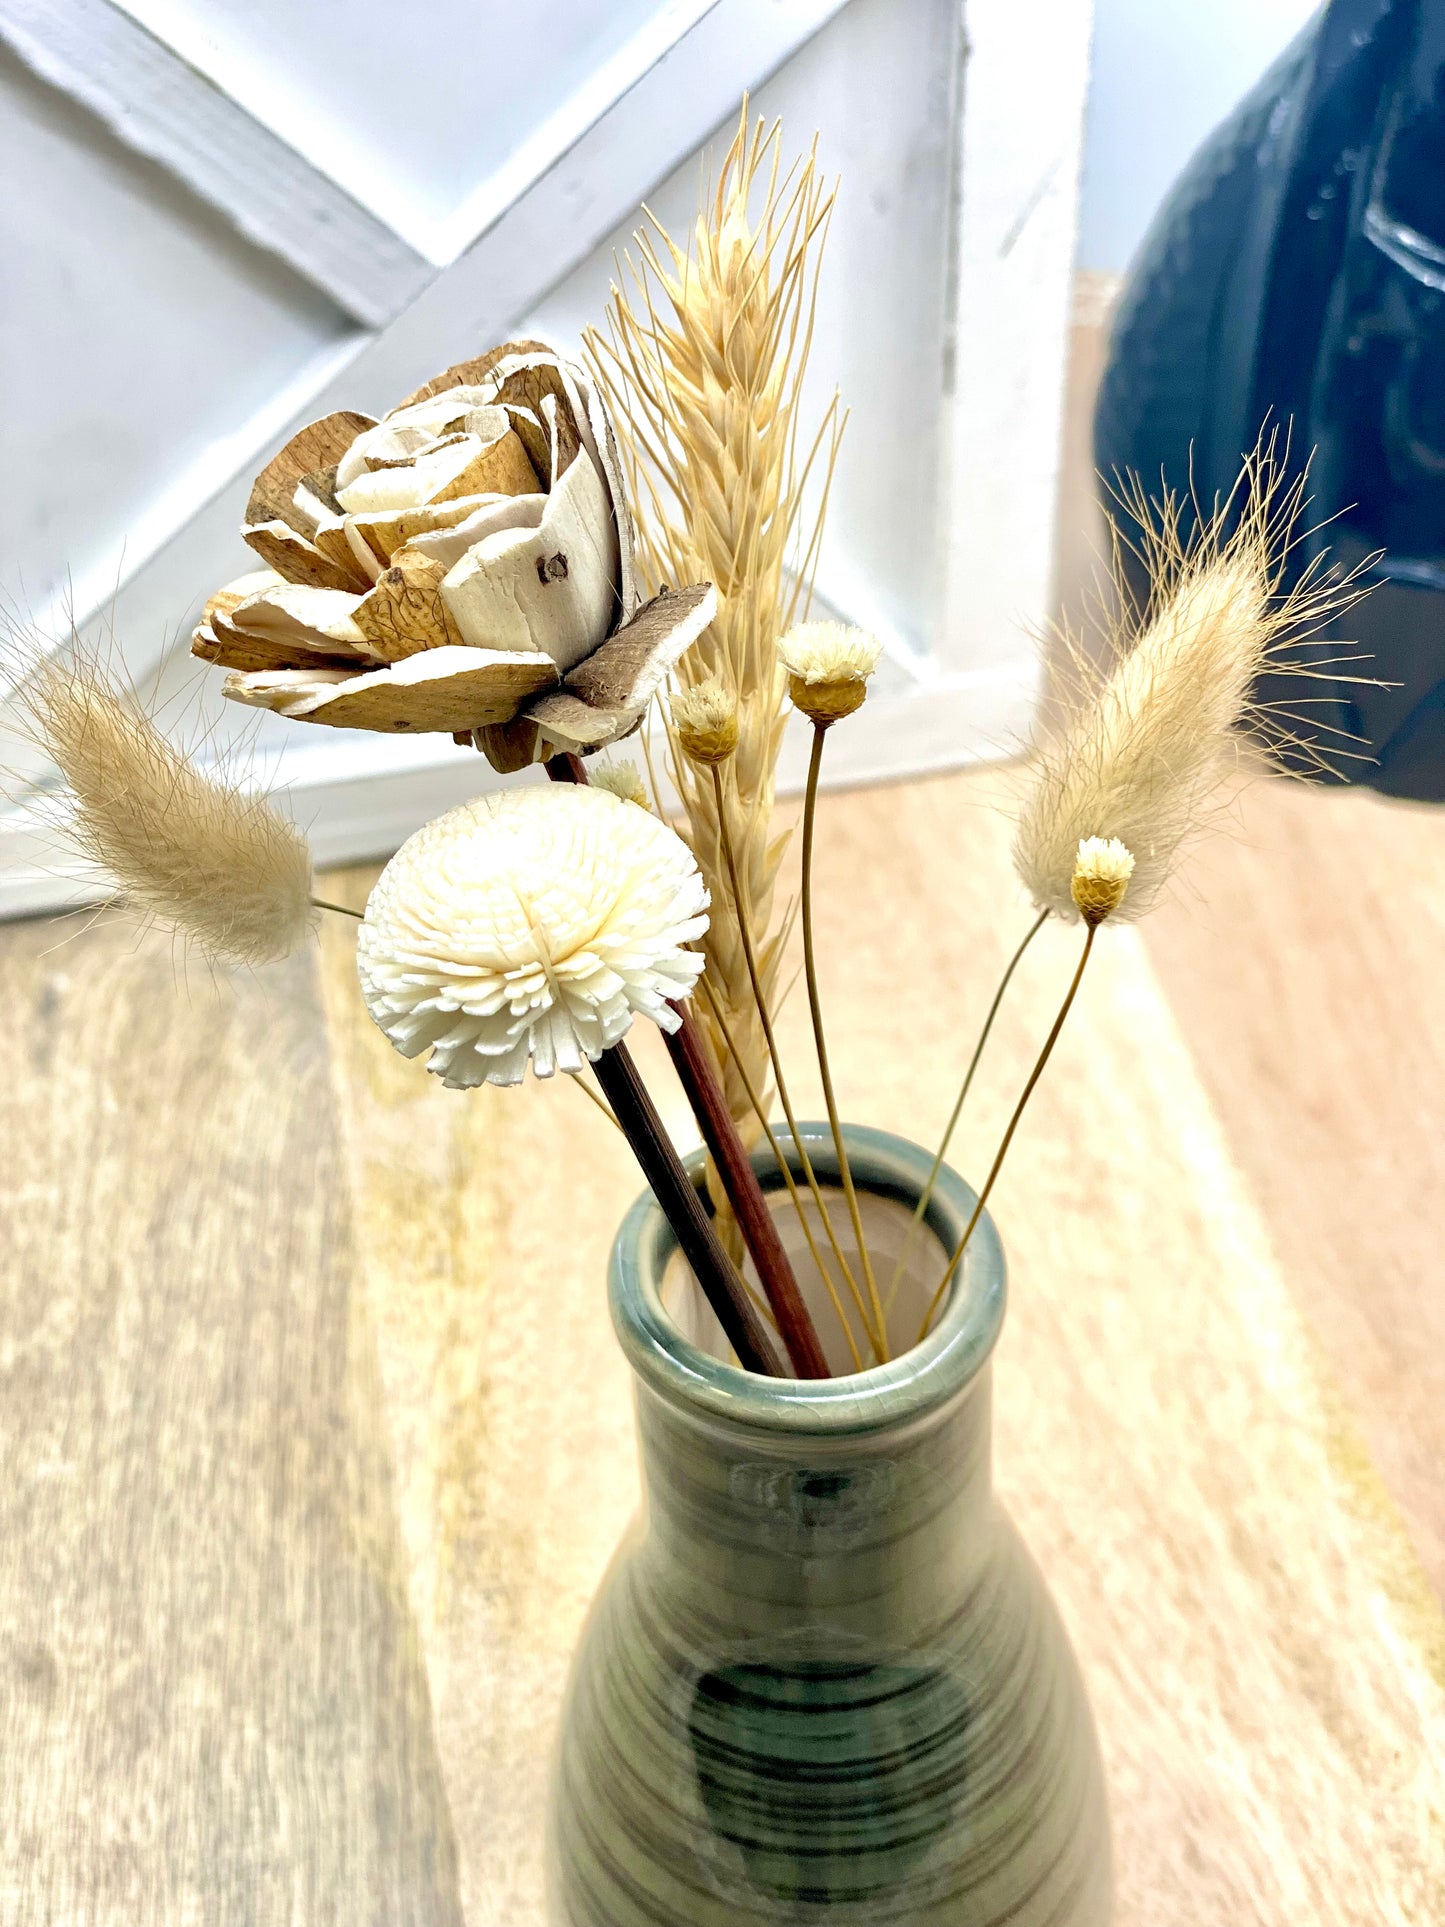 Reed Diffuser Replacement Sticks, The Great Plains, Rattan Wood Flower